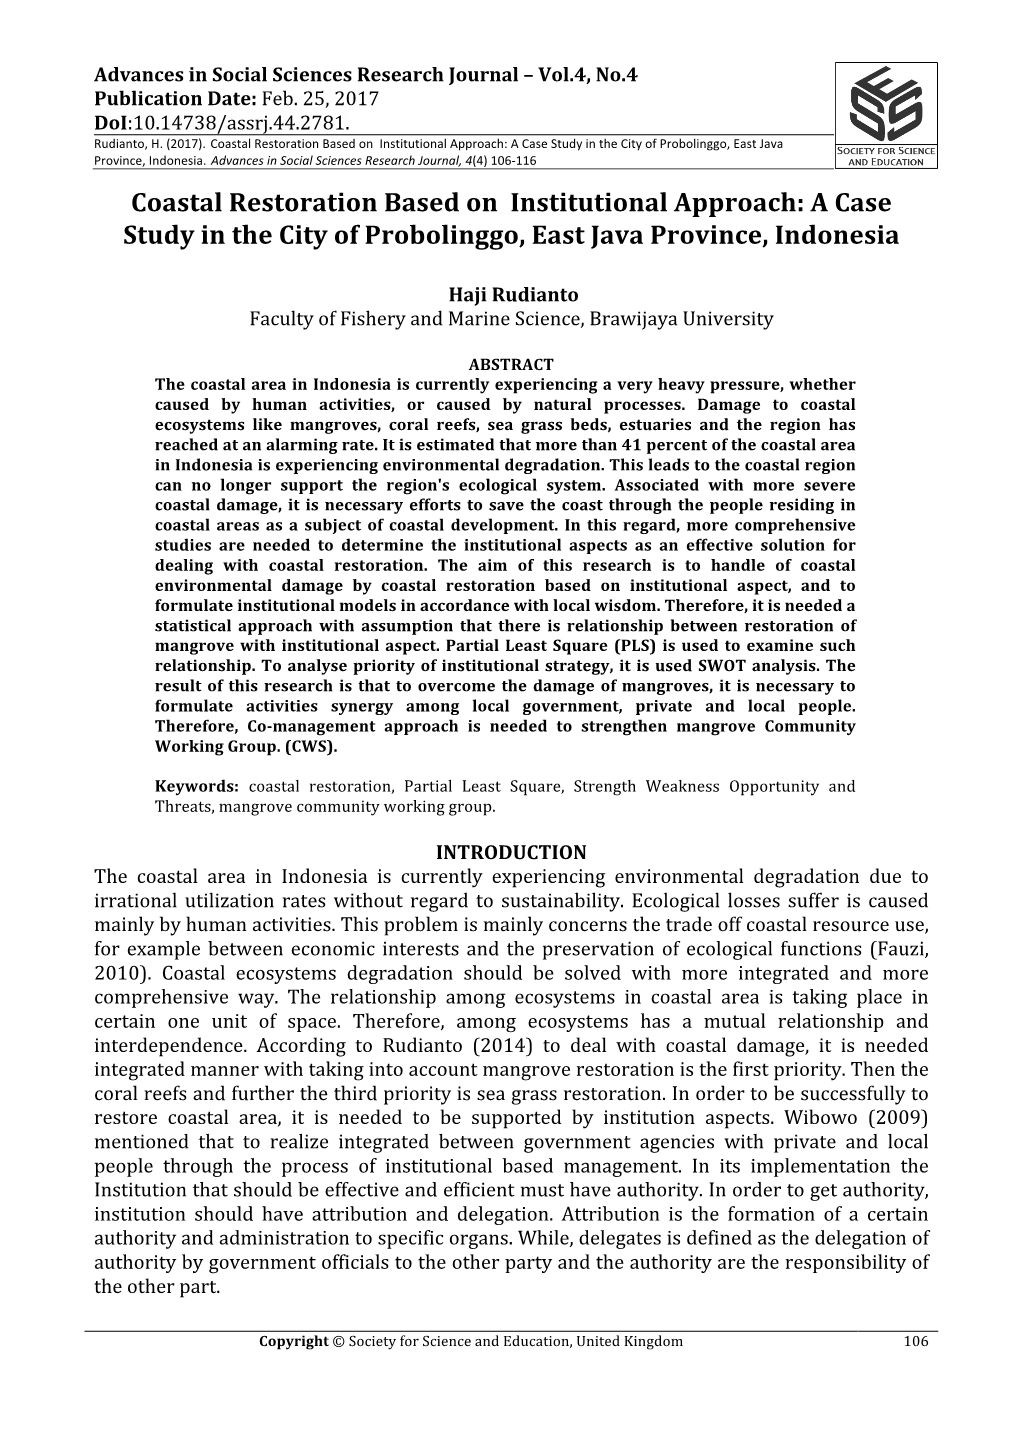 Coastal Restoration Based on Institutional Approach: a Case Study in the City of Probolinggo, East Java Province, Indonesia